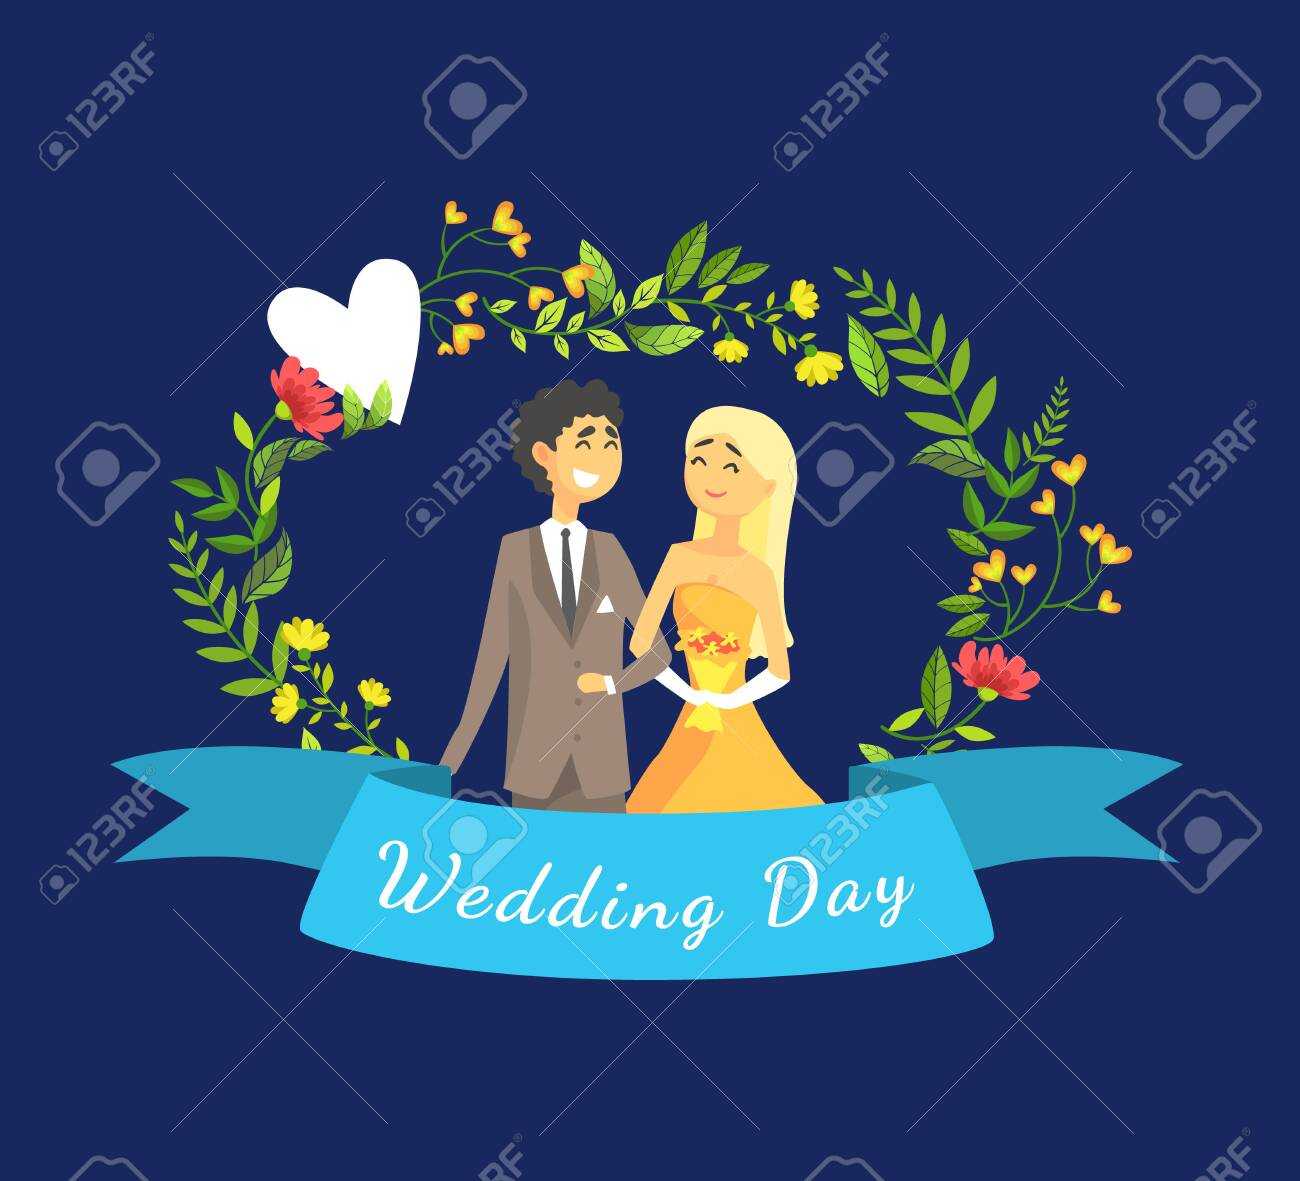 Wedding Day Banner Template With Happy Just Married Couple, Bride.. Pertaining To Bride To Be Banner Template